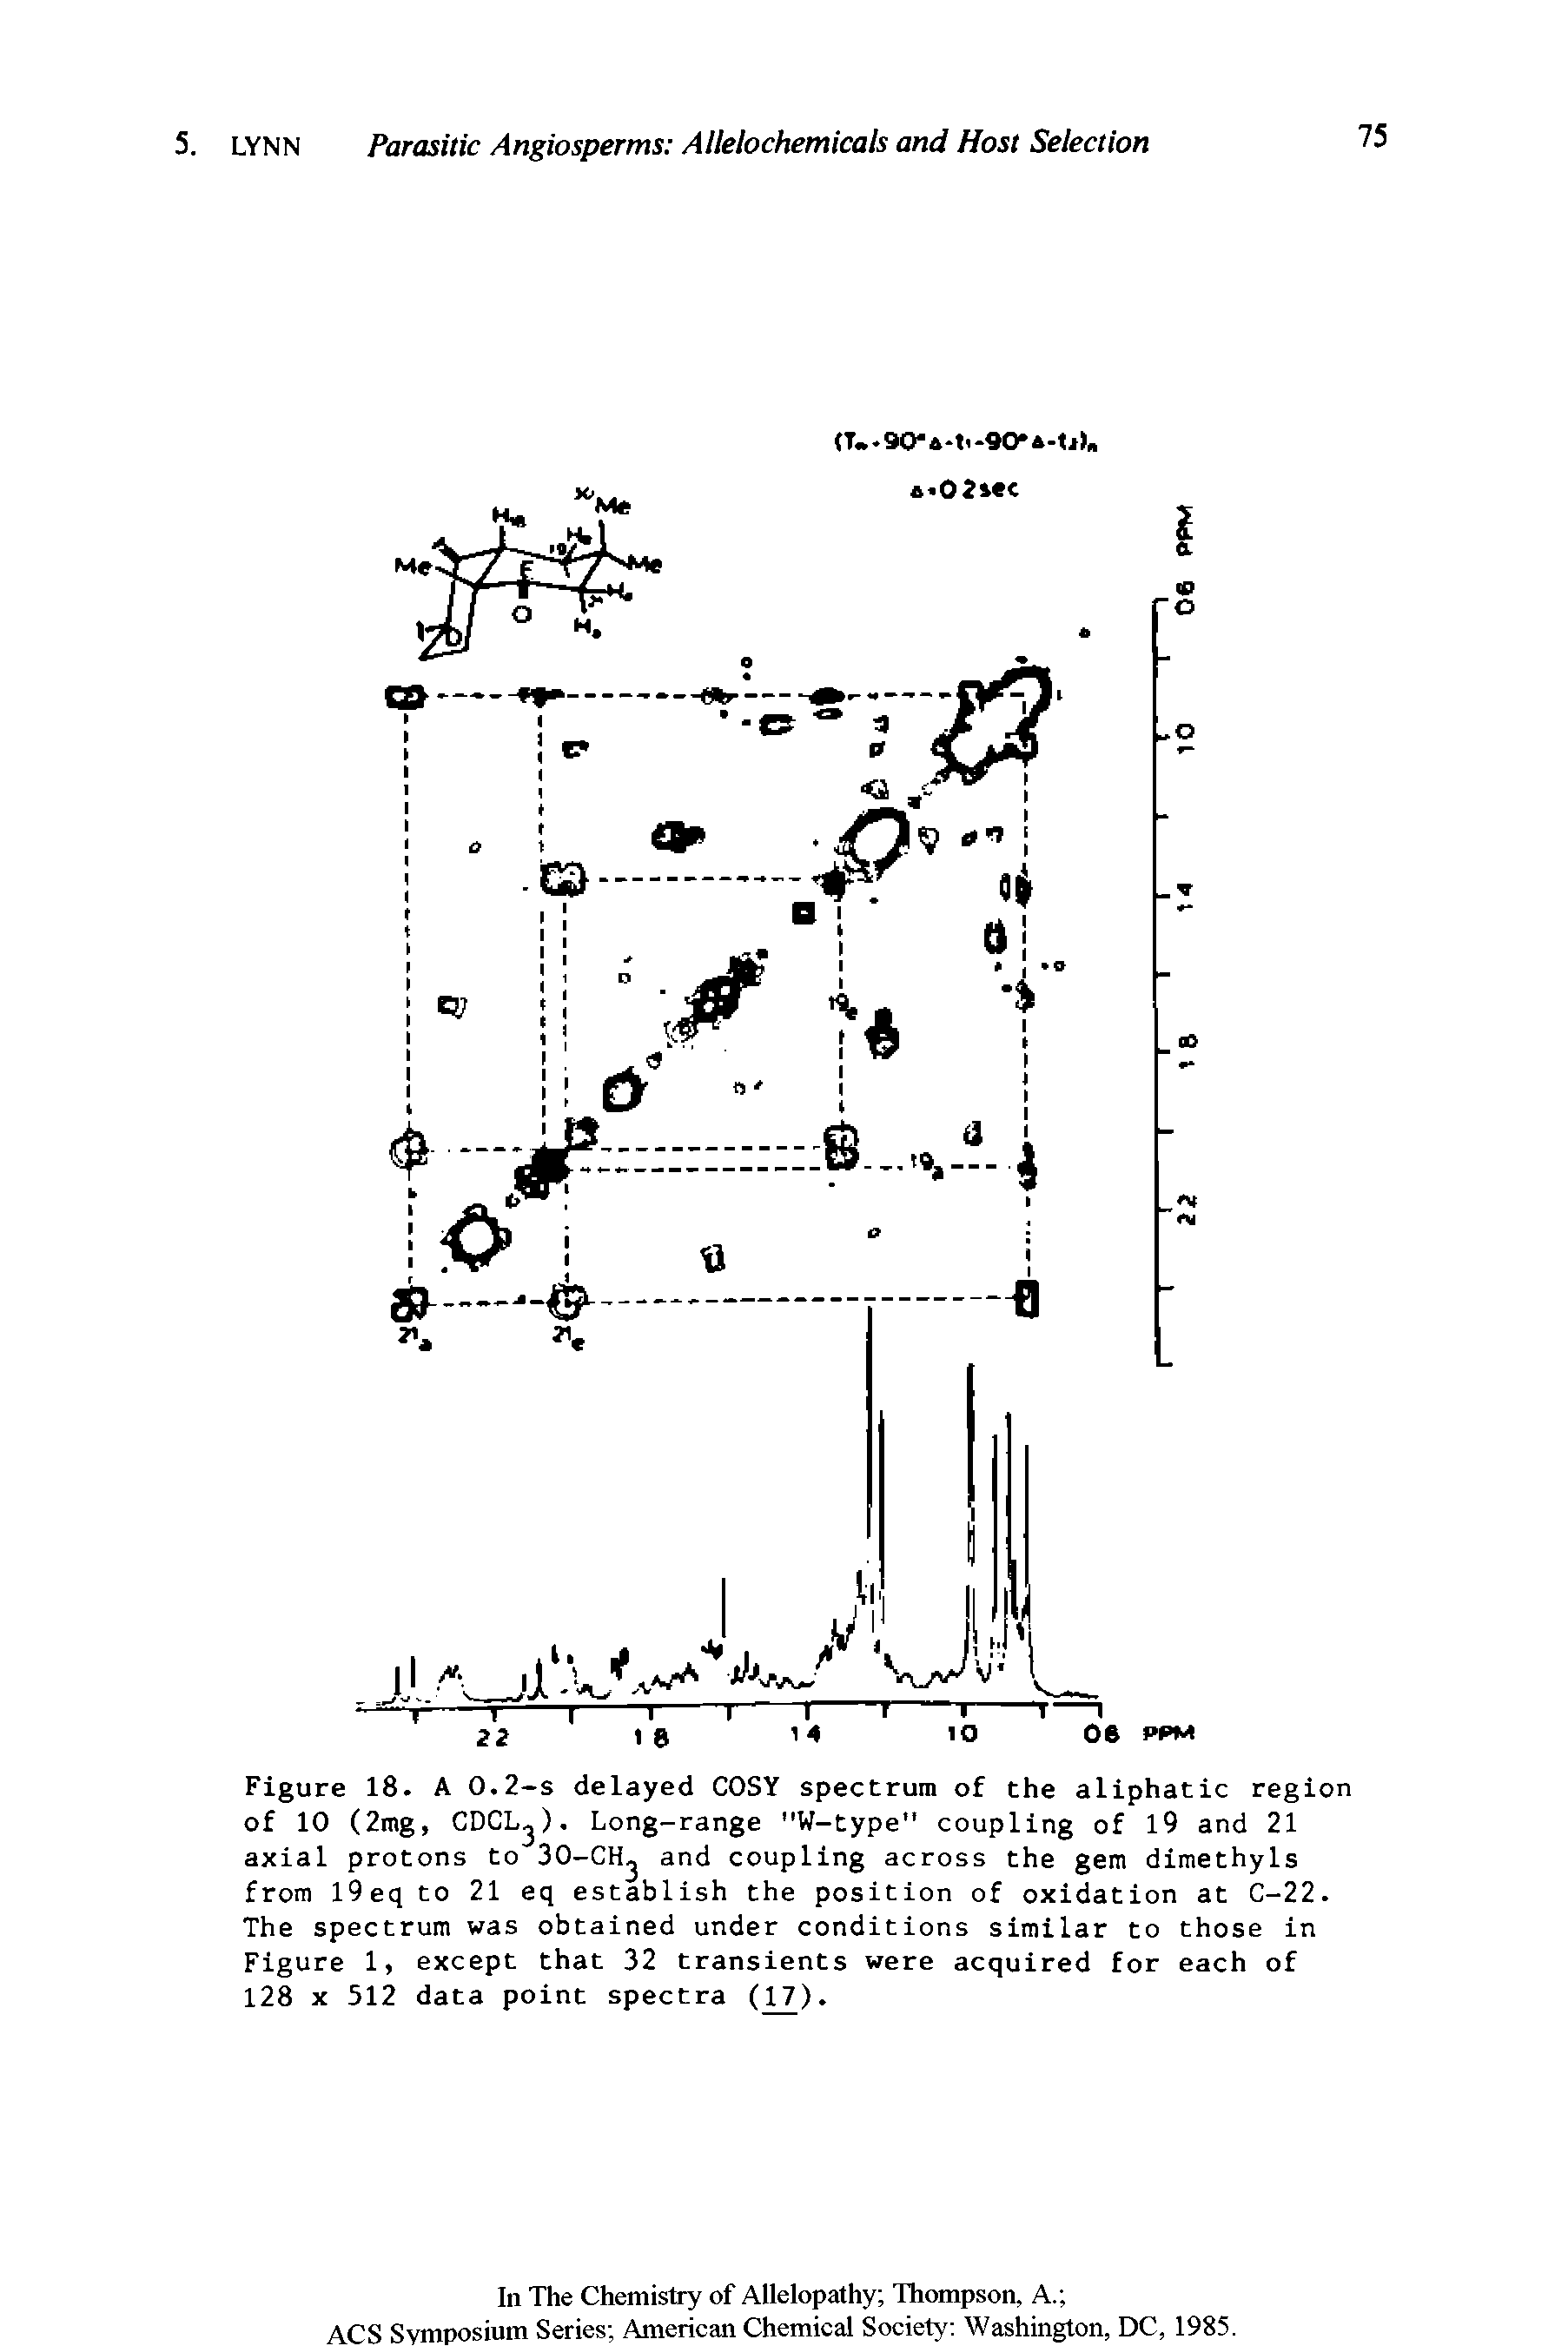 Figure 18. A 0.2-s delayed COSY spectrum of the aliphatic region of 10 (2mg, CDCLj). Long-range "W-type" coupling of 19 and 21 axial protons to 30-CHj and coupling across the gem dimethyls from I9eq to 21 eq establish the position of oxidation at C-22. The spectrum was obtained under conditions similar to those in Figure 1, except that 32 transients were acquired for each of 128 x 512 data point spectra (17).